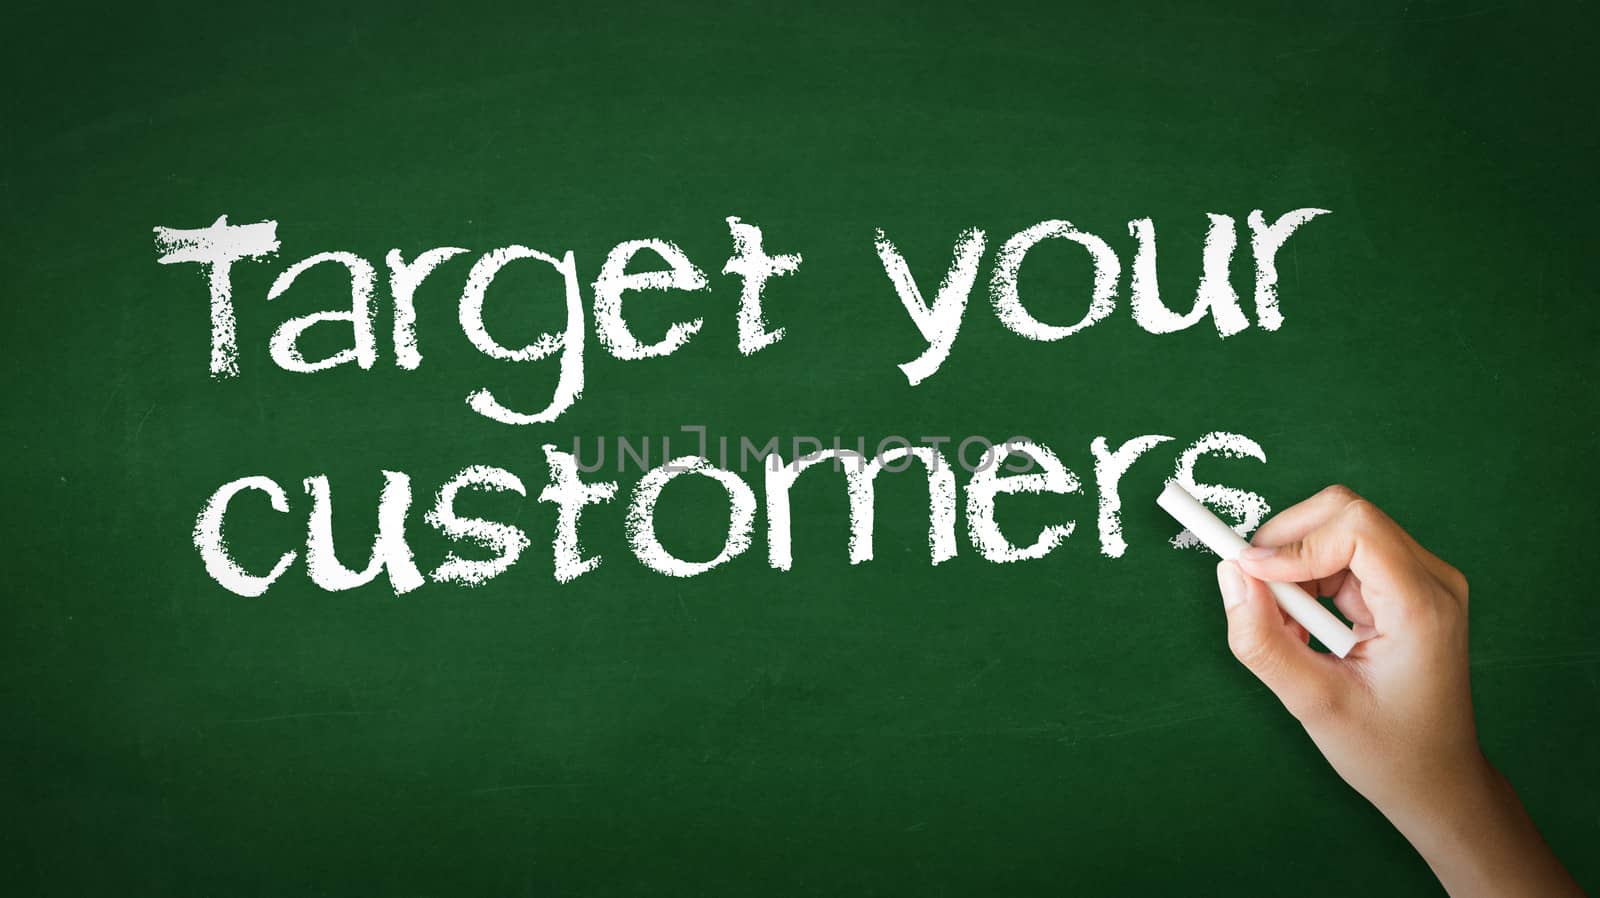 A person drawing and pointing at a Target Your Customers Chalk Illustration